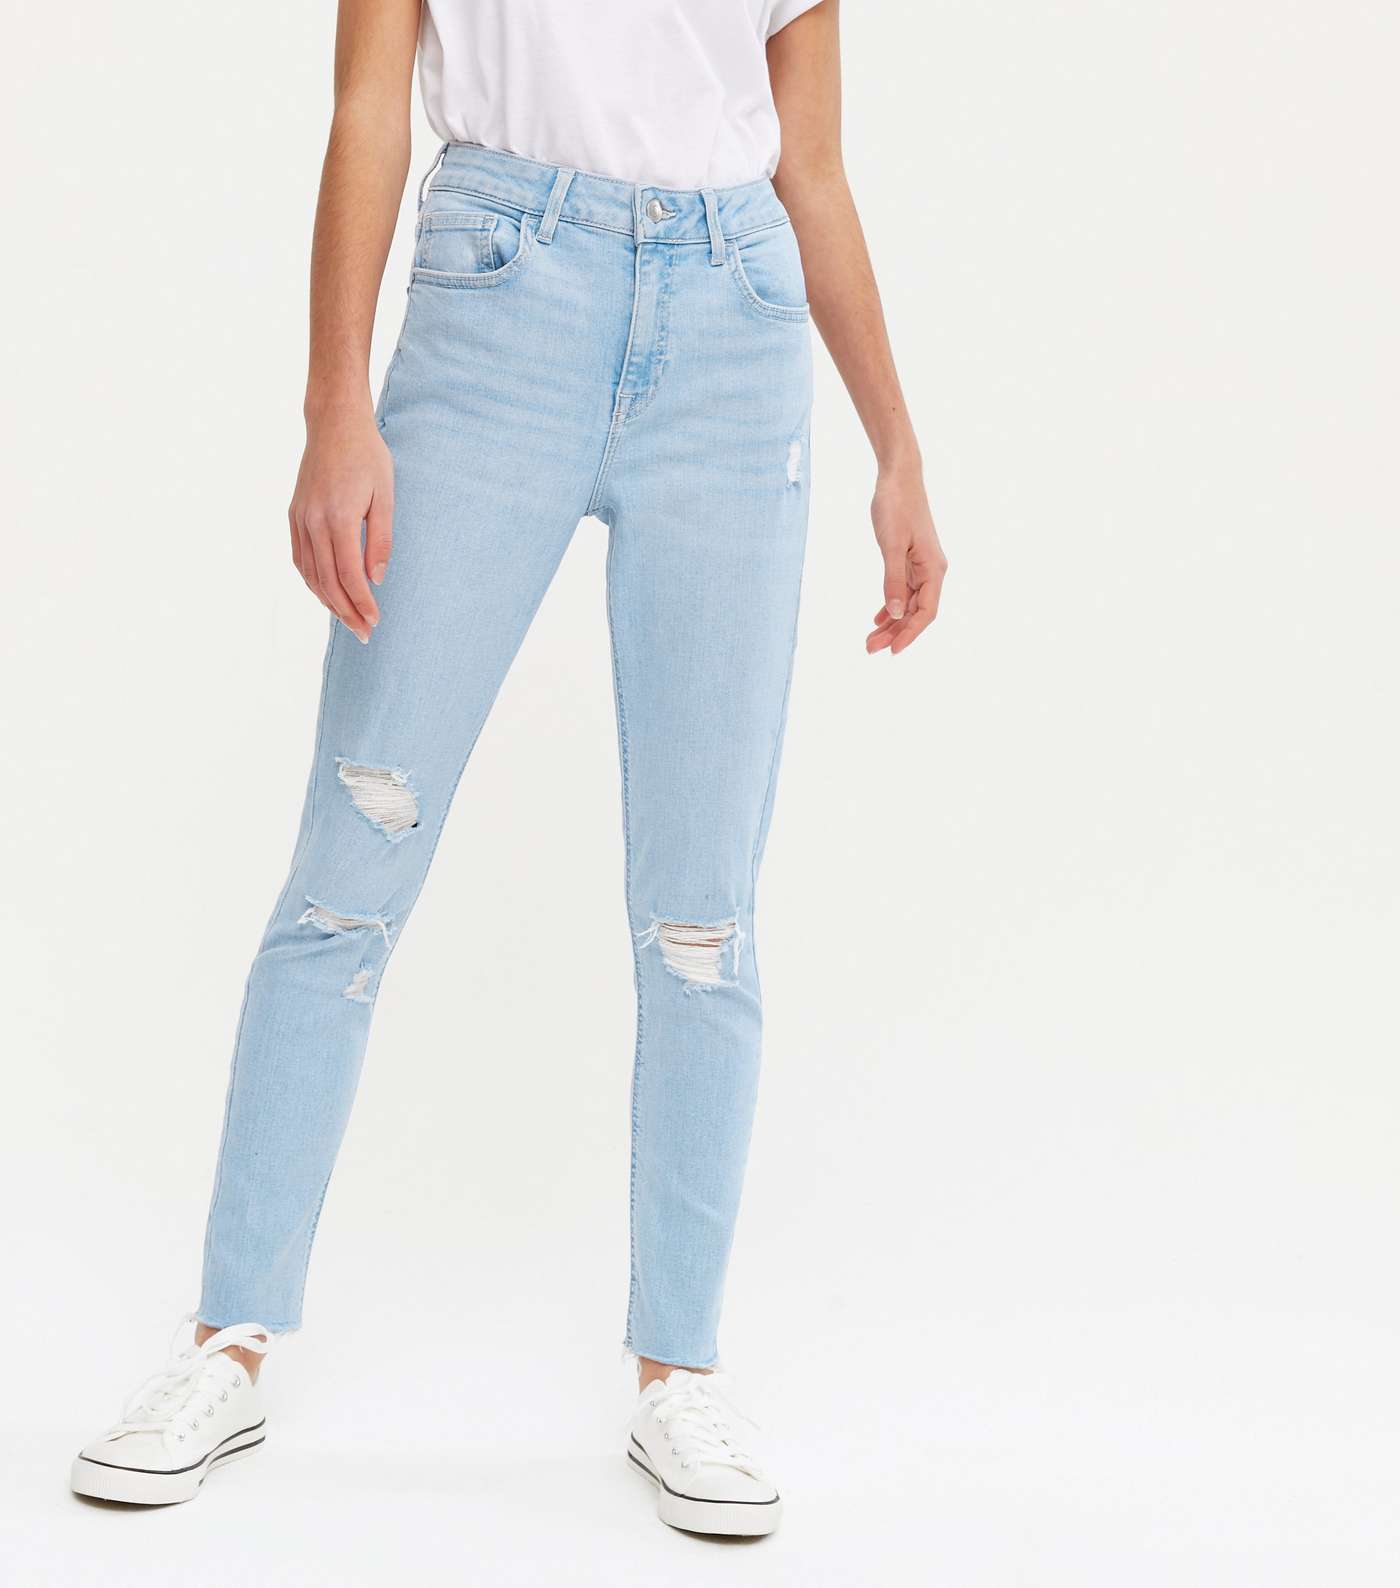 Girls Pale Blue Ripped High Rise Ashleigh Skinny Jeans Image 2